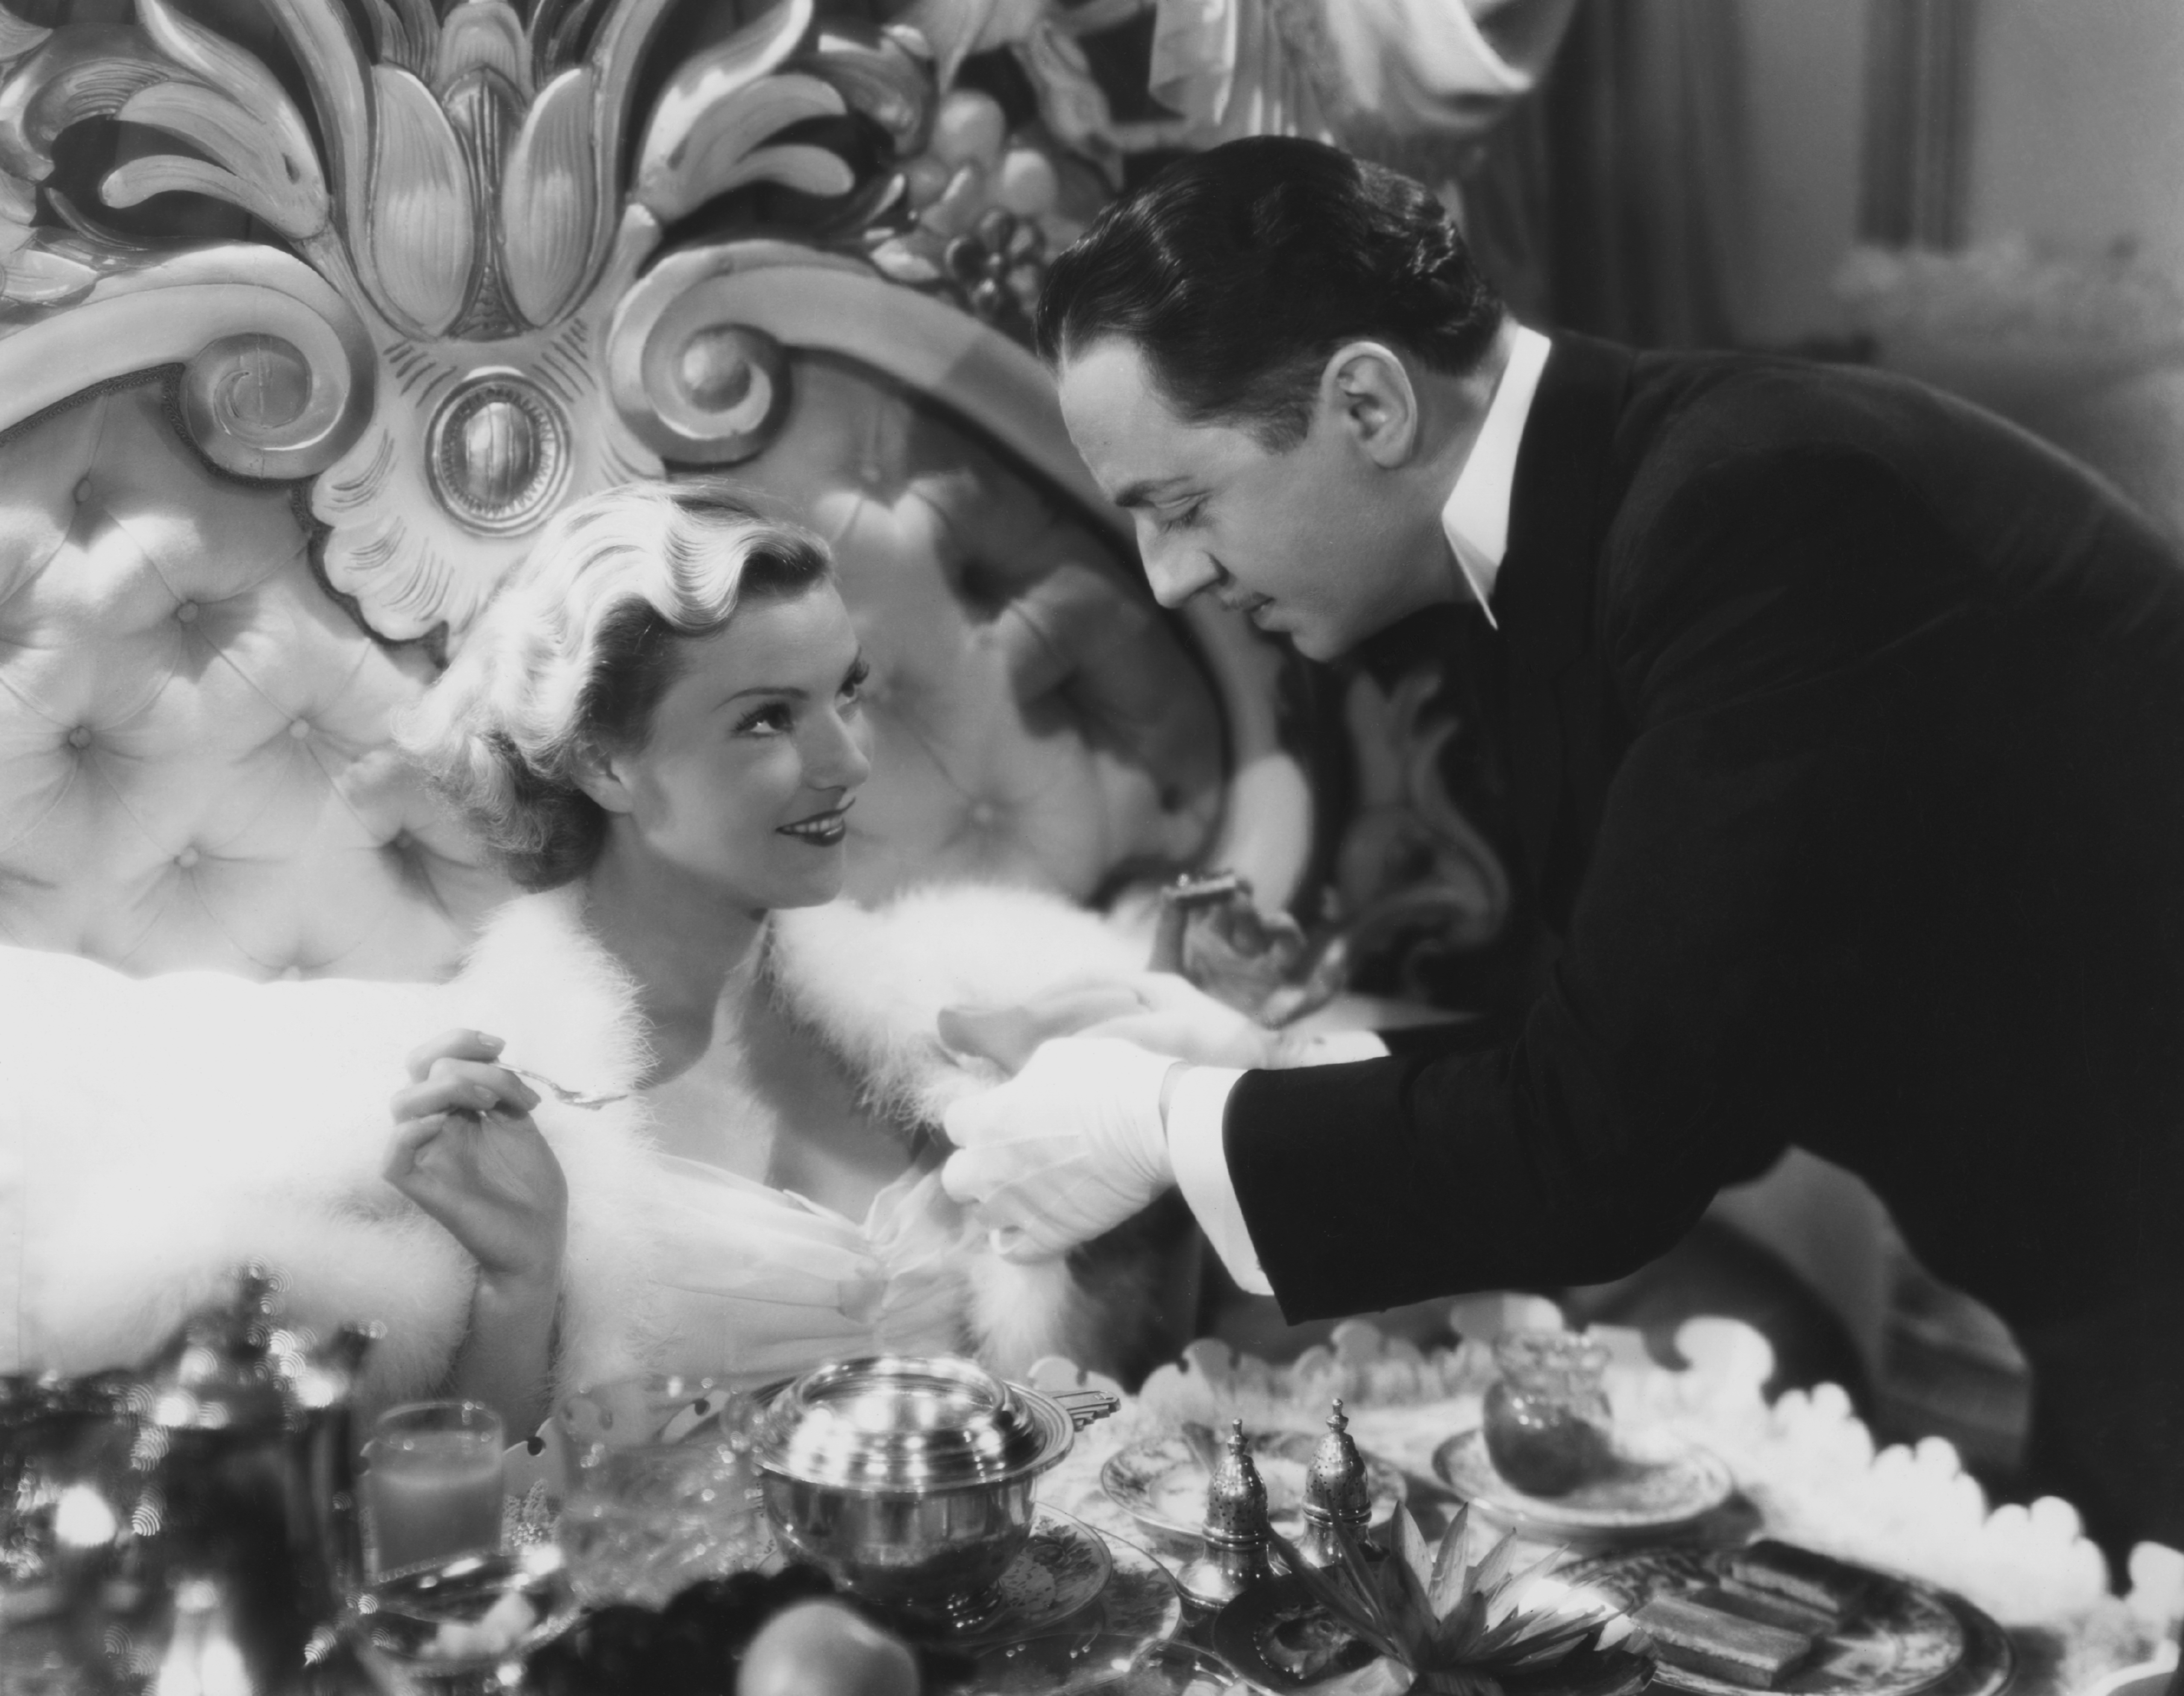 Still of Carole Lombard and William Powell in My Man Godfrey (1936)